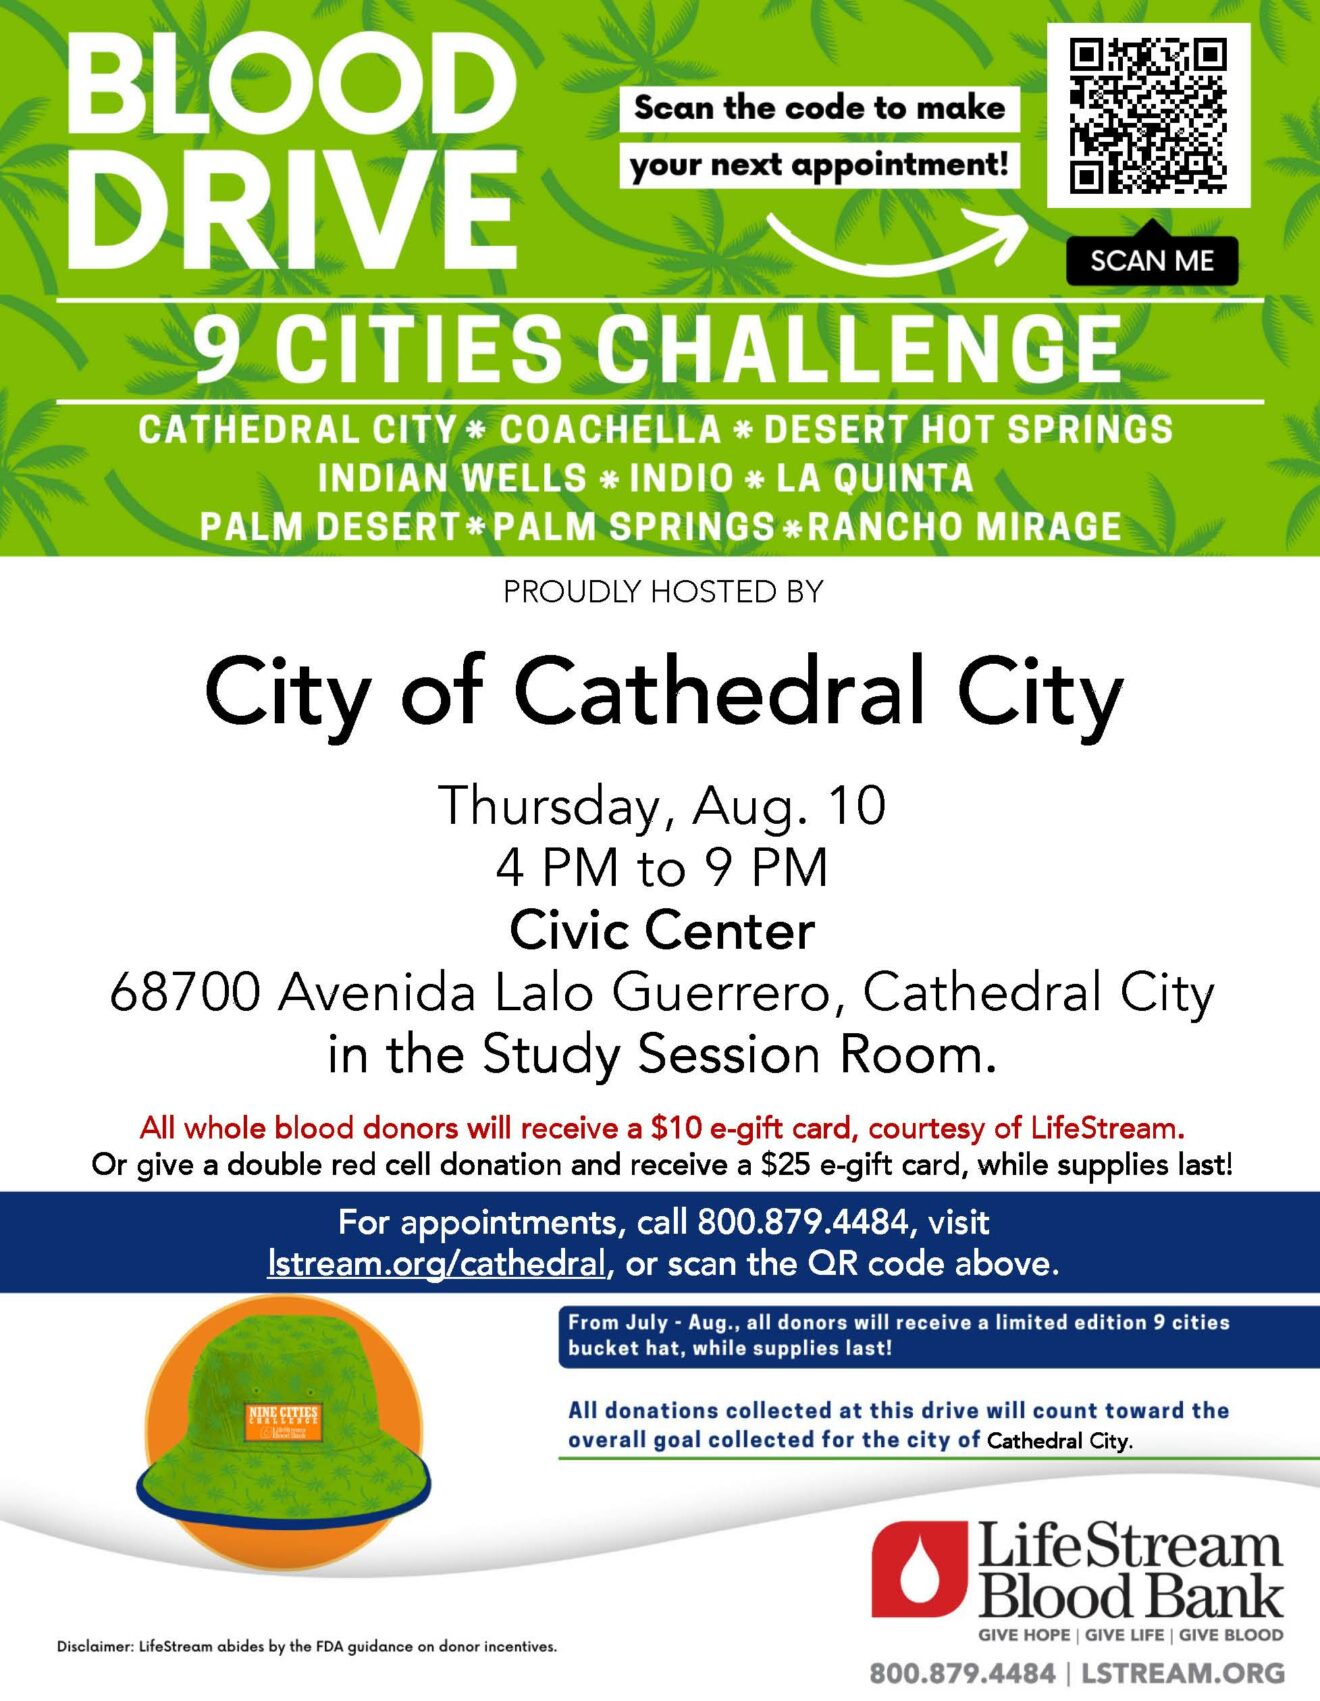 9 Cities Challenge: Save a Life by Donating Blood in Cathedral City on Thursday, Aug. 10, 2023